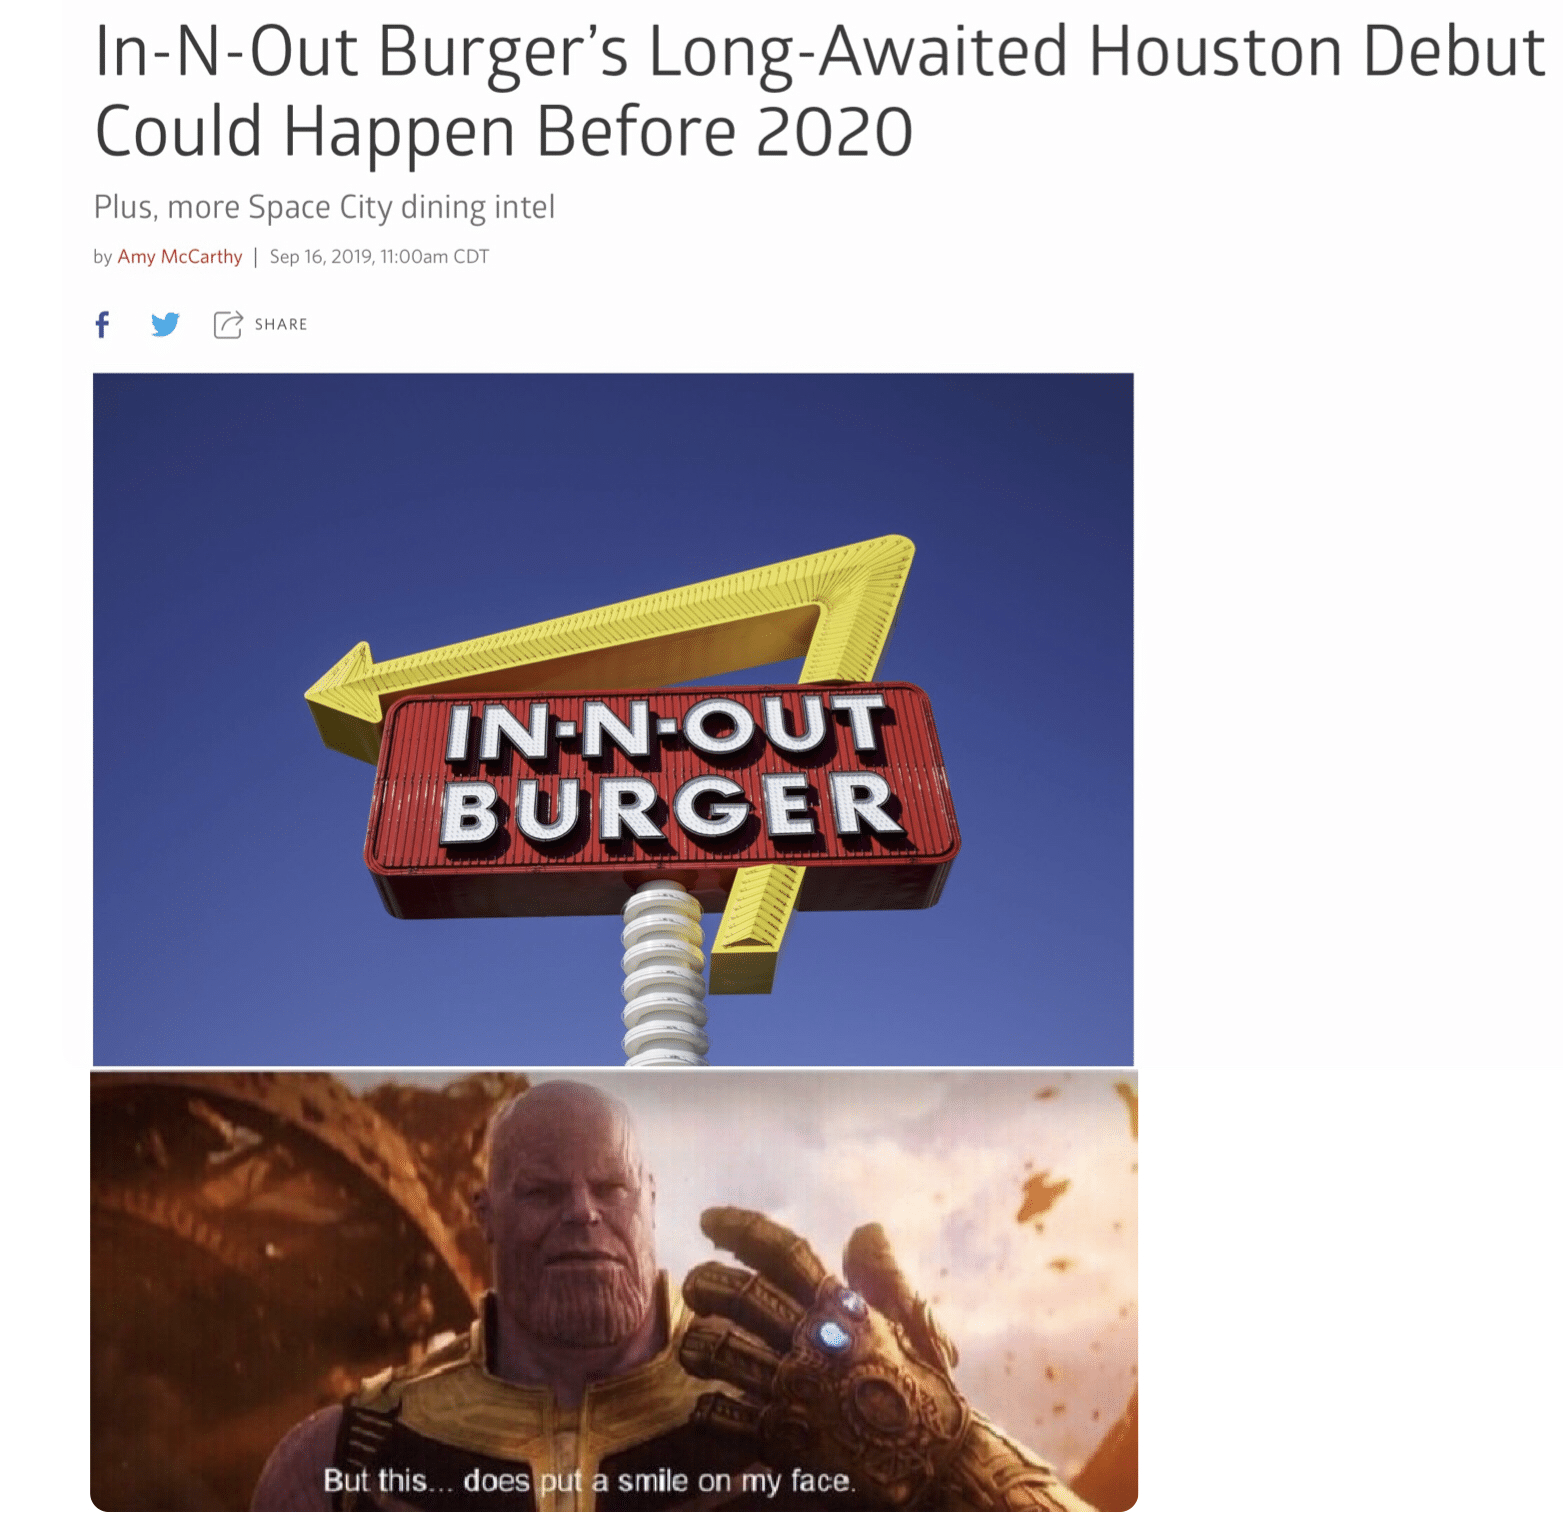 thanos avengers-memes thanos text: In-N-Out Burger's Long-Awaited Houston Debut Could Happen Before 2020 Plus, more Space City dining intel by Amy McCarthy I Sep 16, 2019, 11:00am CDT IN-N•OUT BURGER But this.. doesbu('Å smile on my face. 